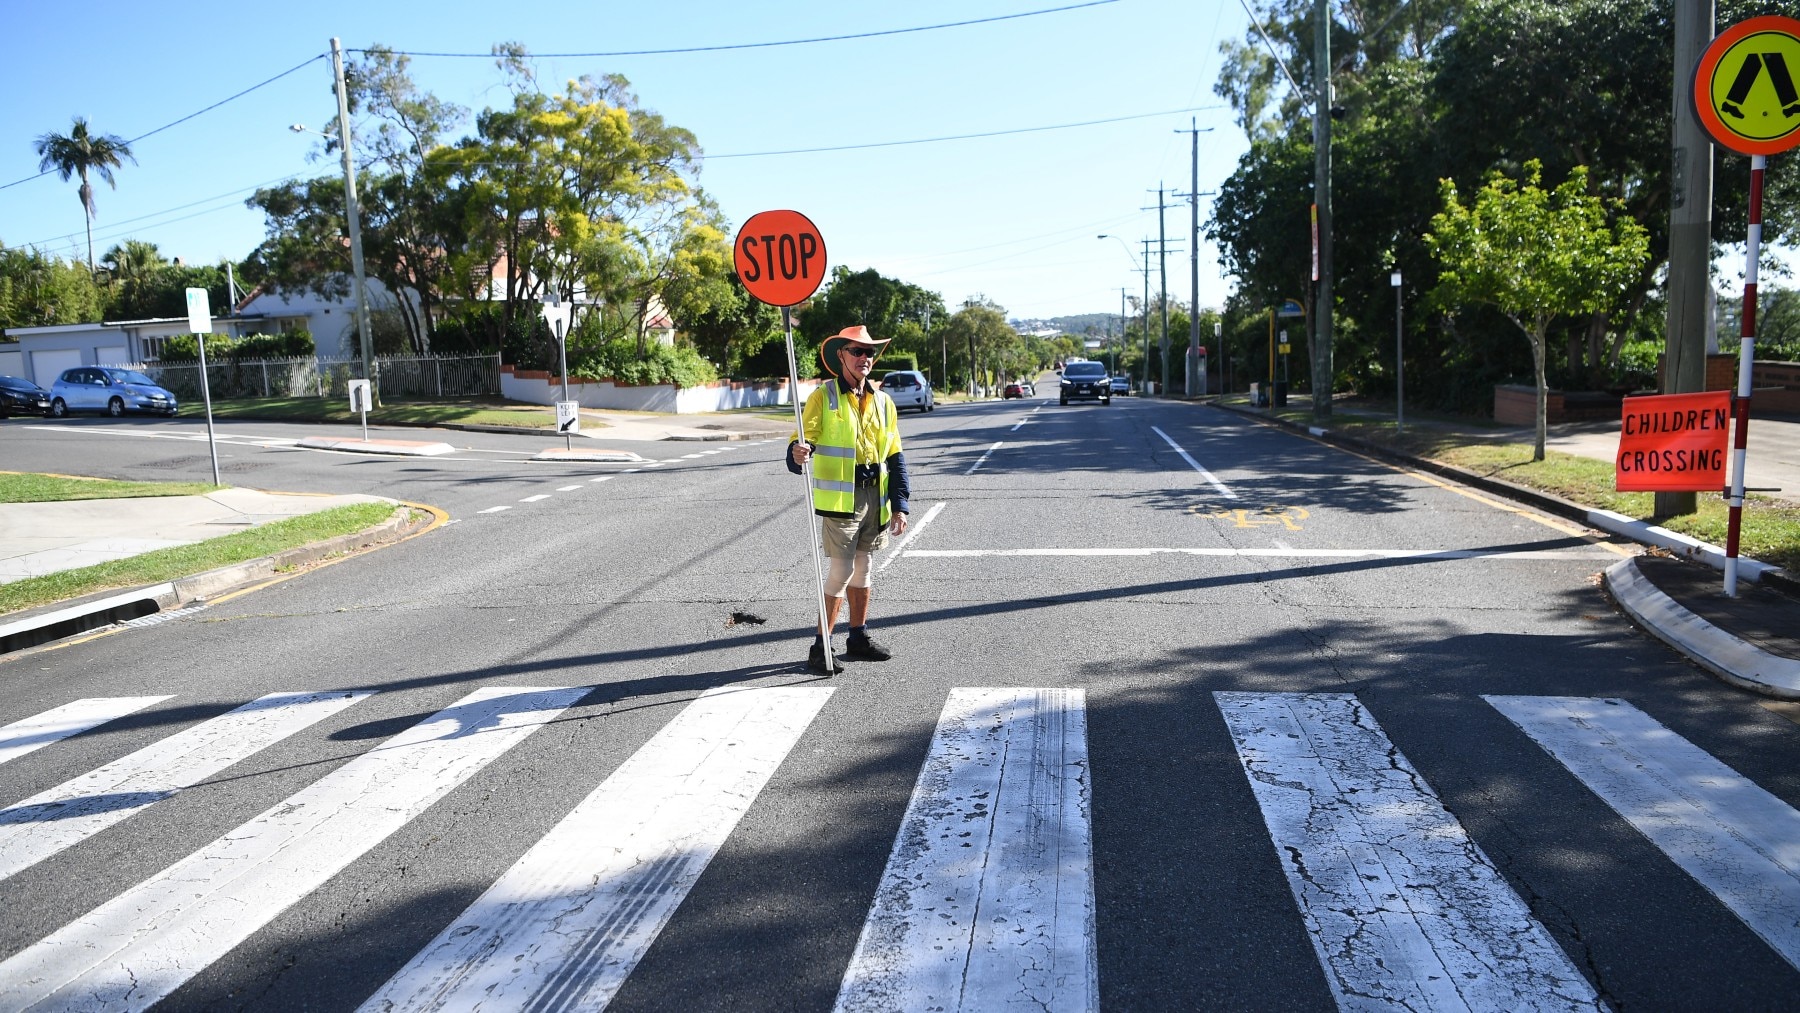 Pedestrian crossing attendant Peter (first name only given) performs his duty outside a primary school, in Brisbane, Monday, March 30, 2020.